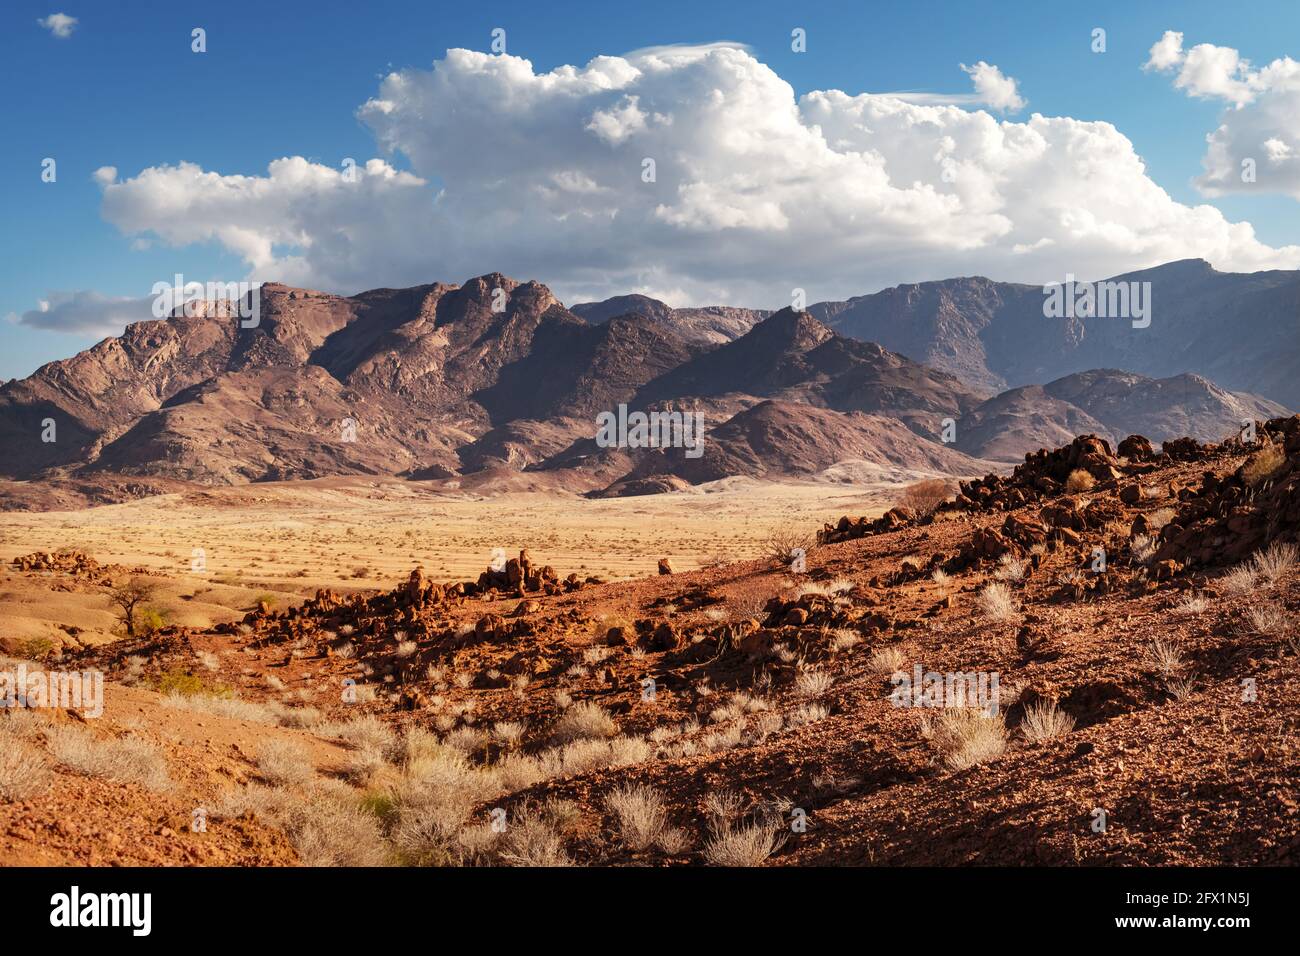 Rocks of Namib Desert, Namibia, Africa. Red mountains and yellow savanna with blue sky background. Landscape photography Stock Photo